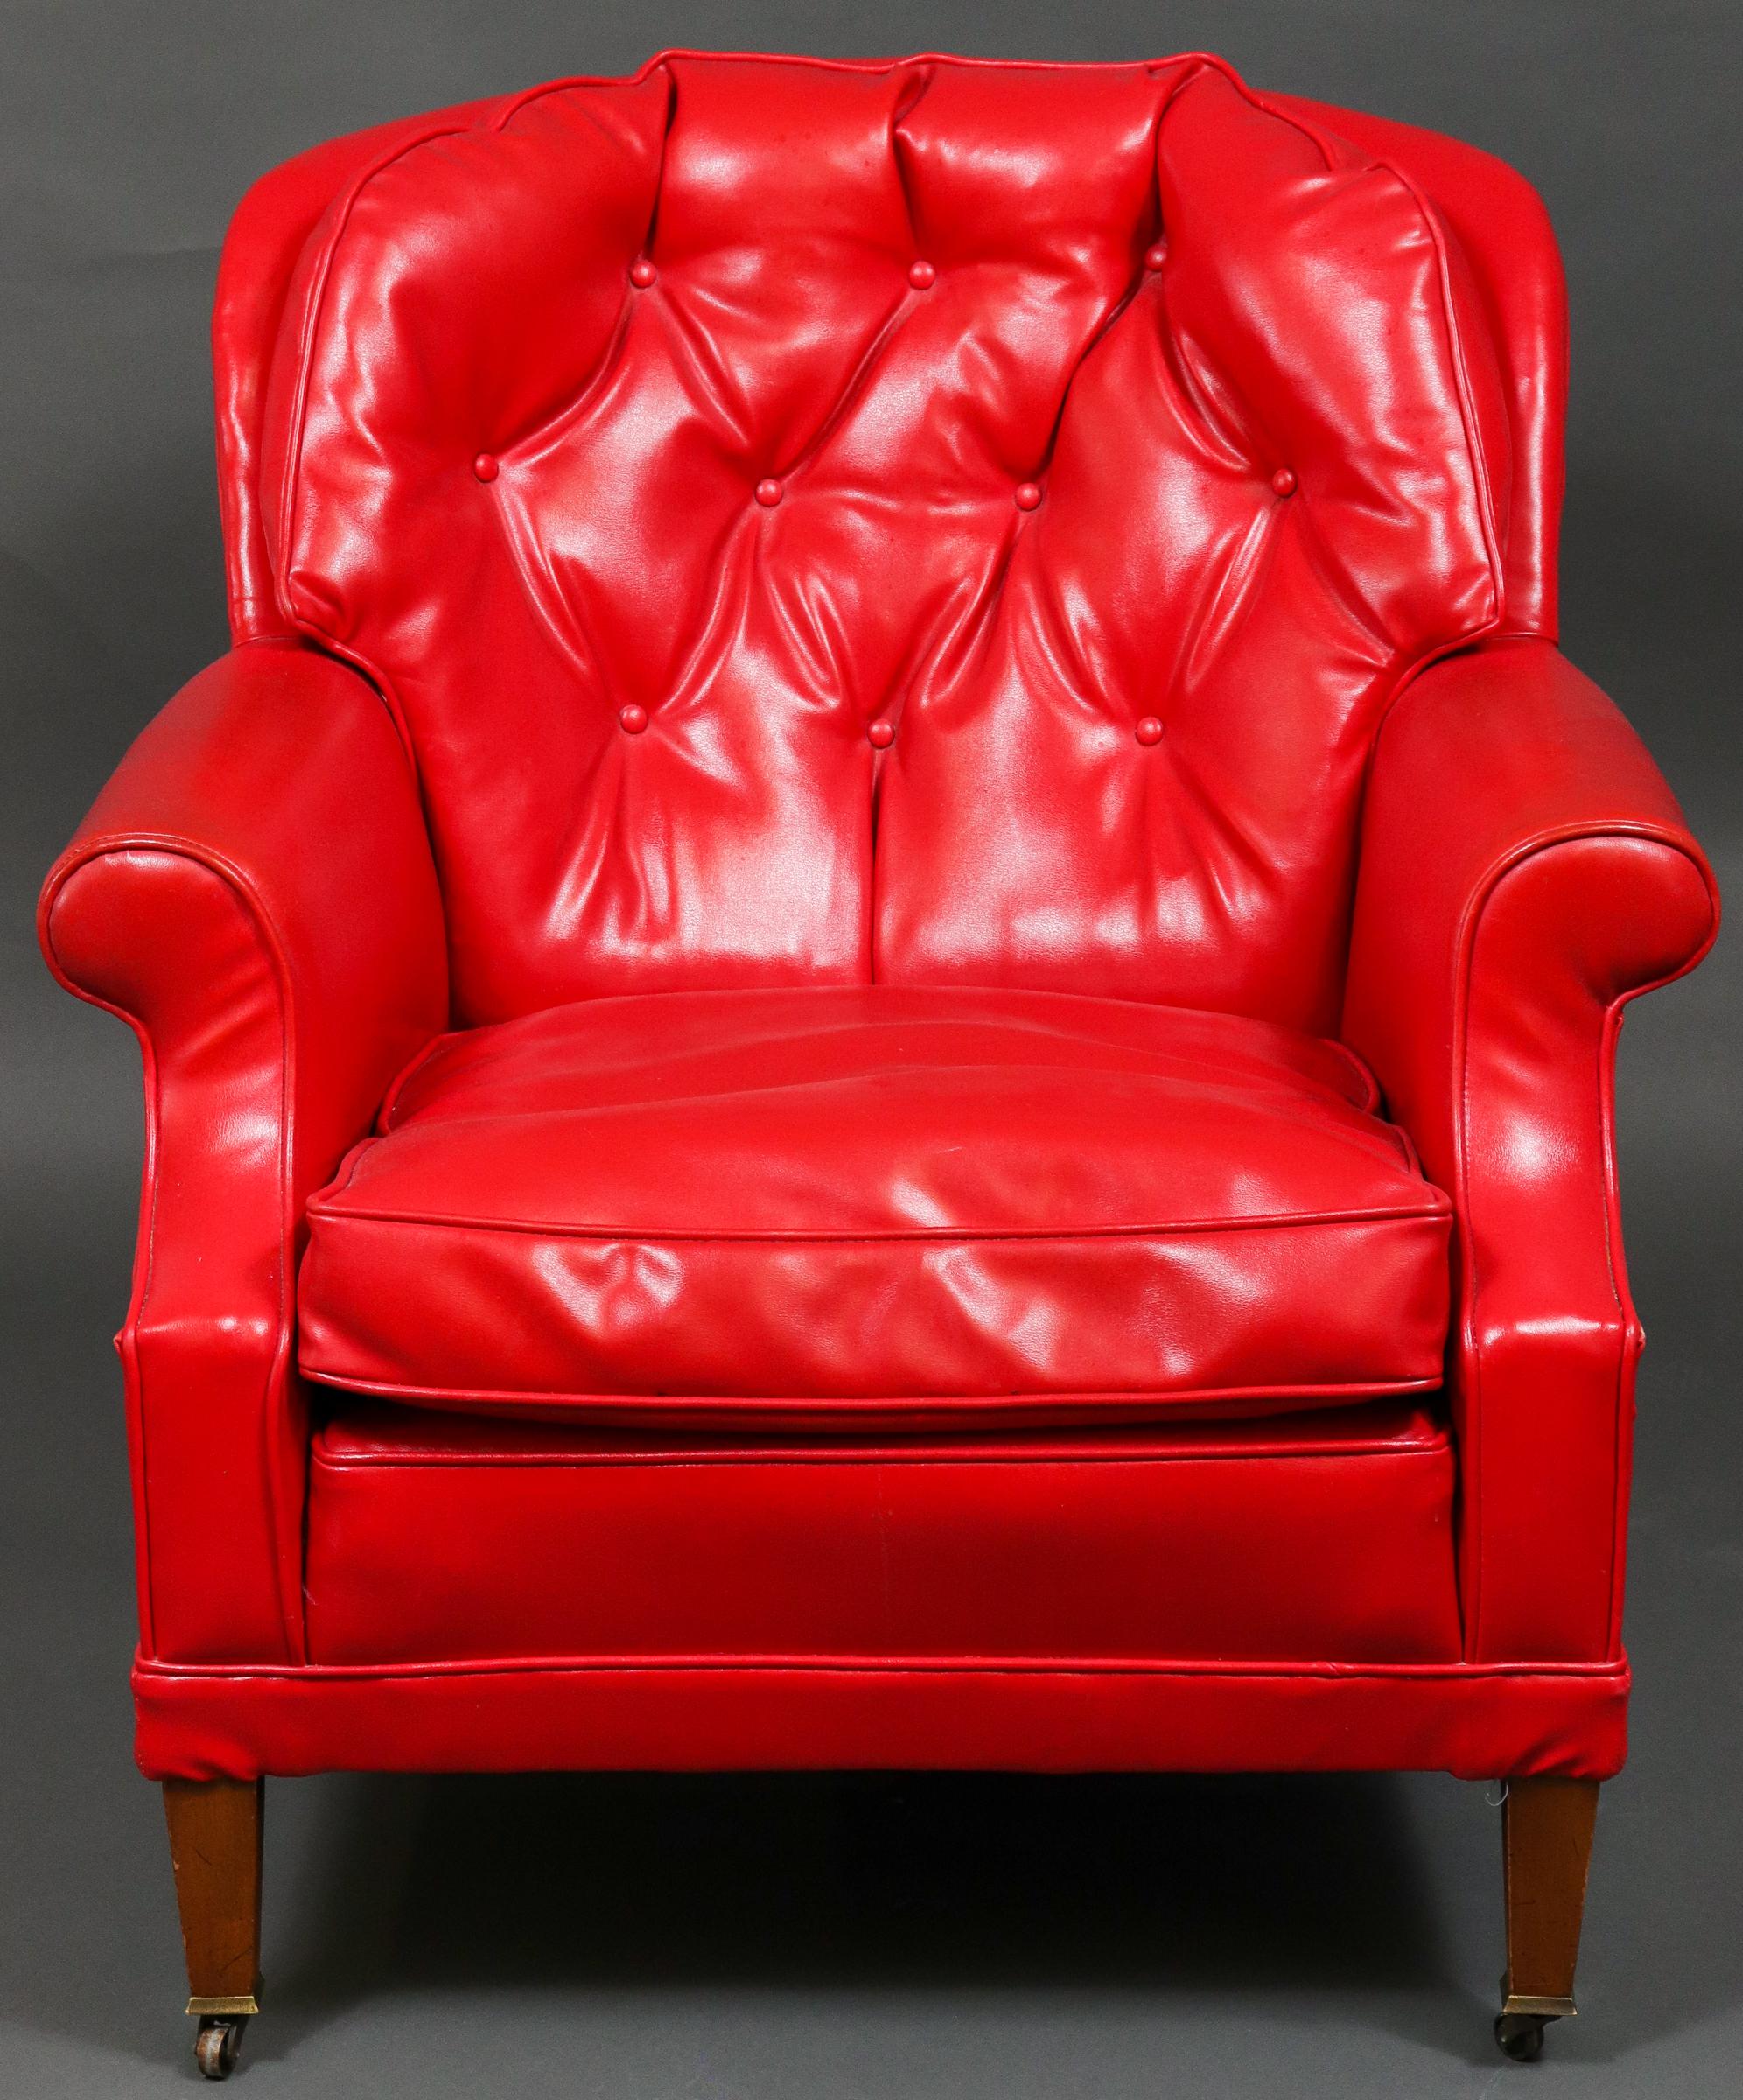 Traditional tufted red vinyl club chair raised on tapering legs with casters. Measures: 32